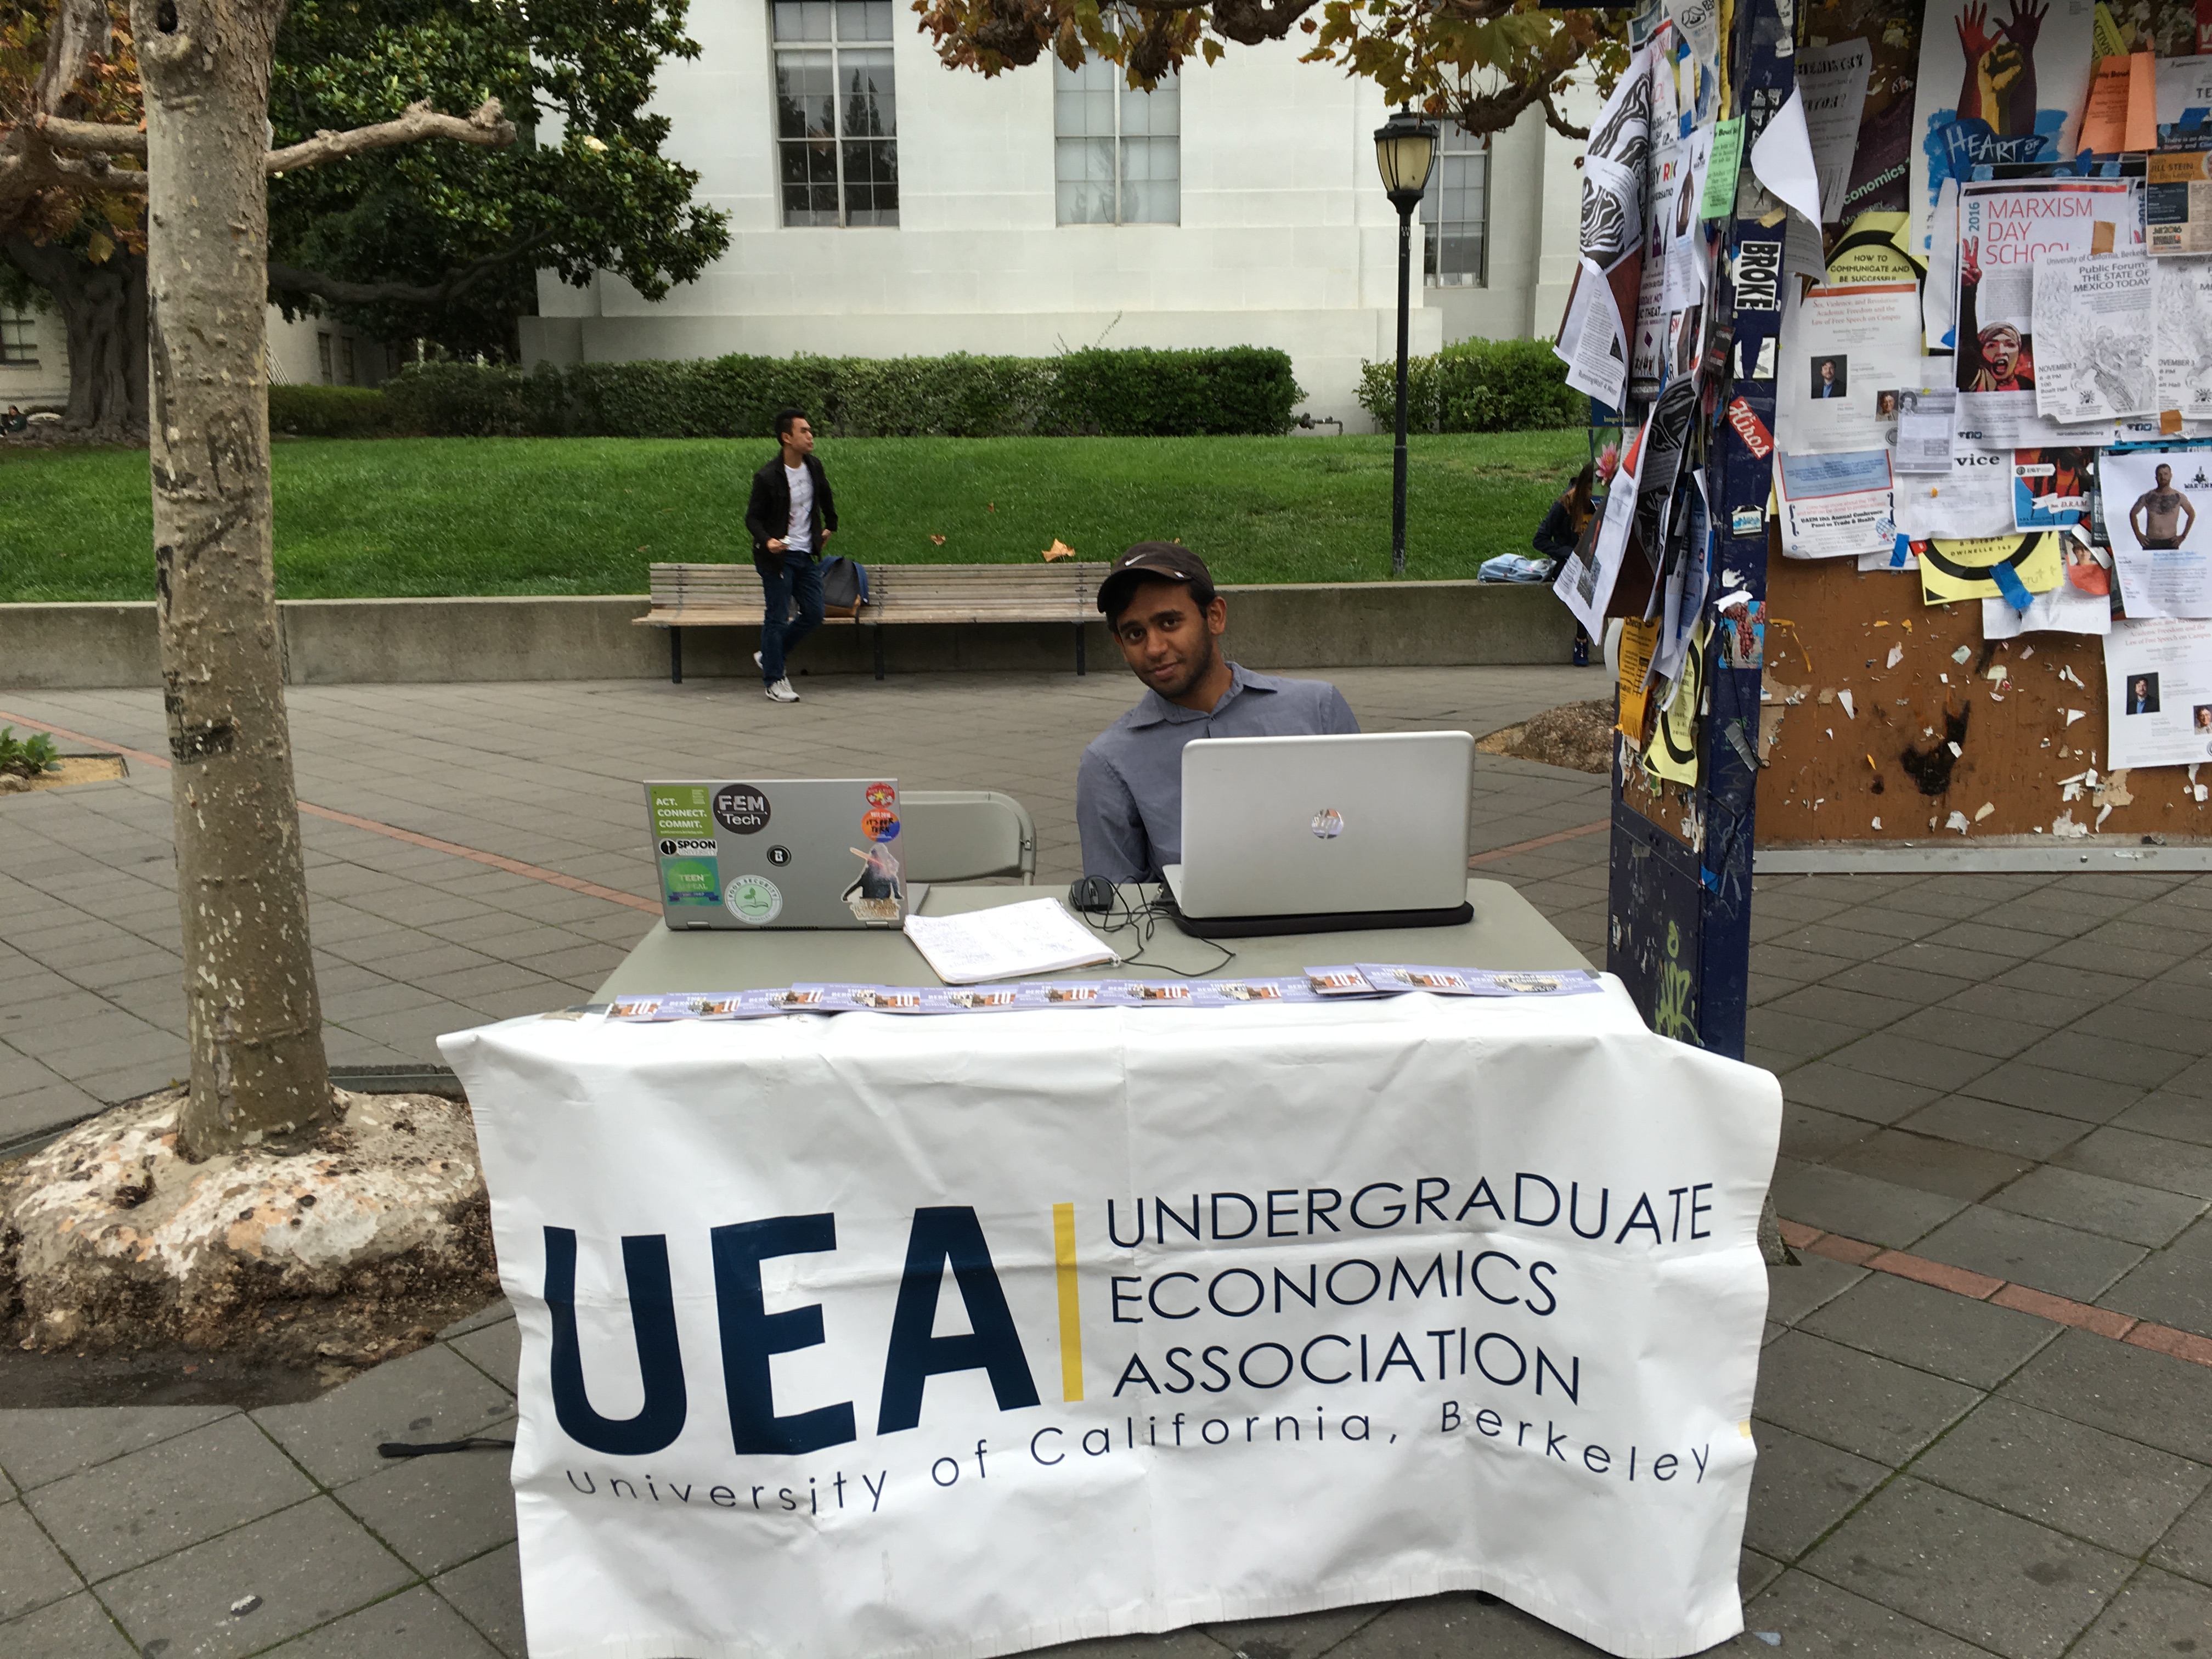 Come find us on Sproul Plaza